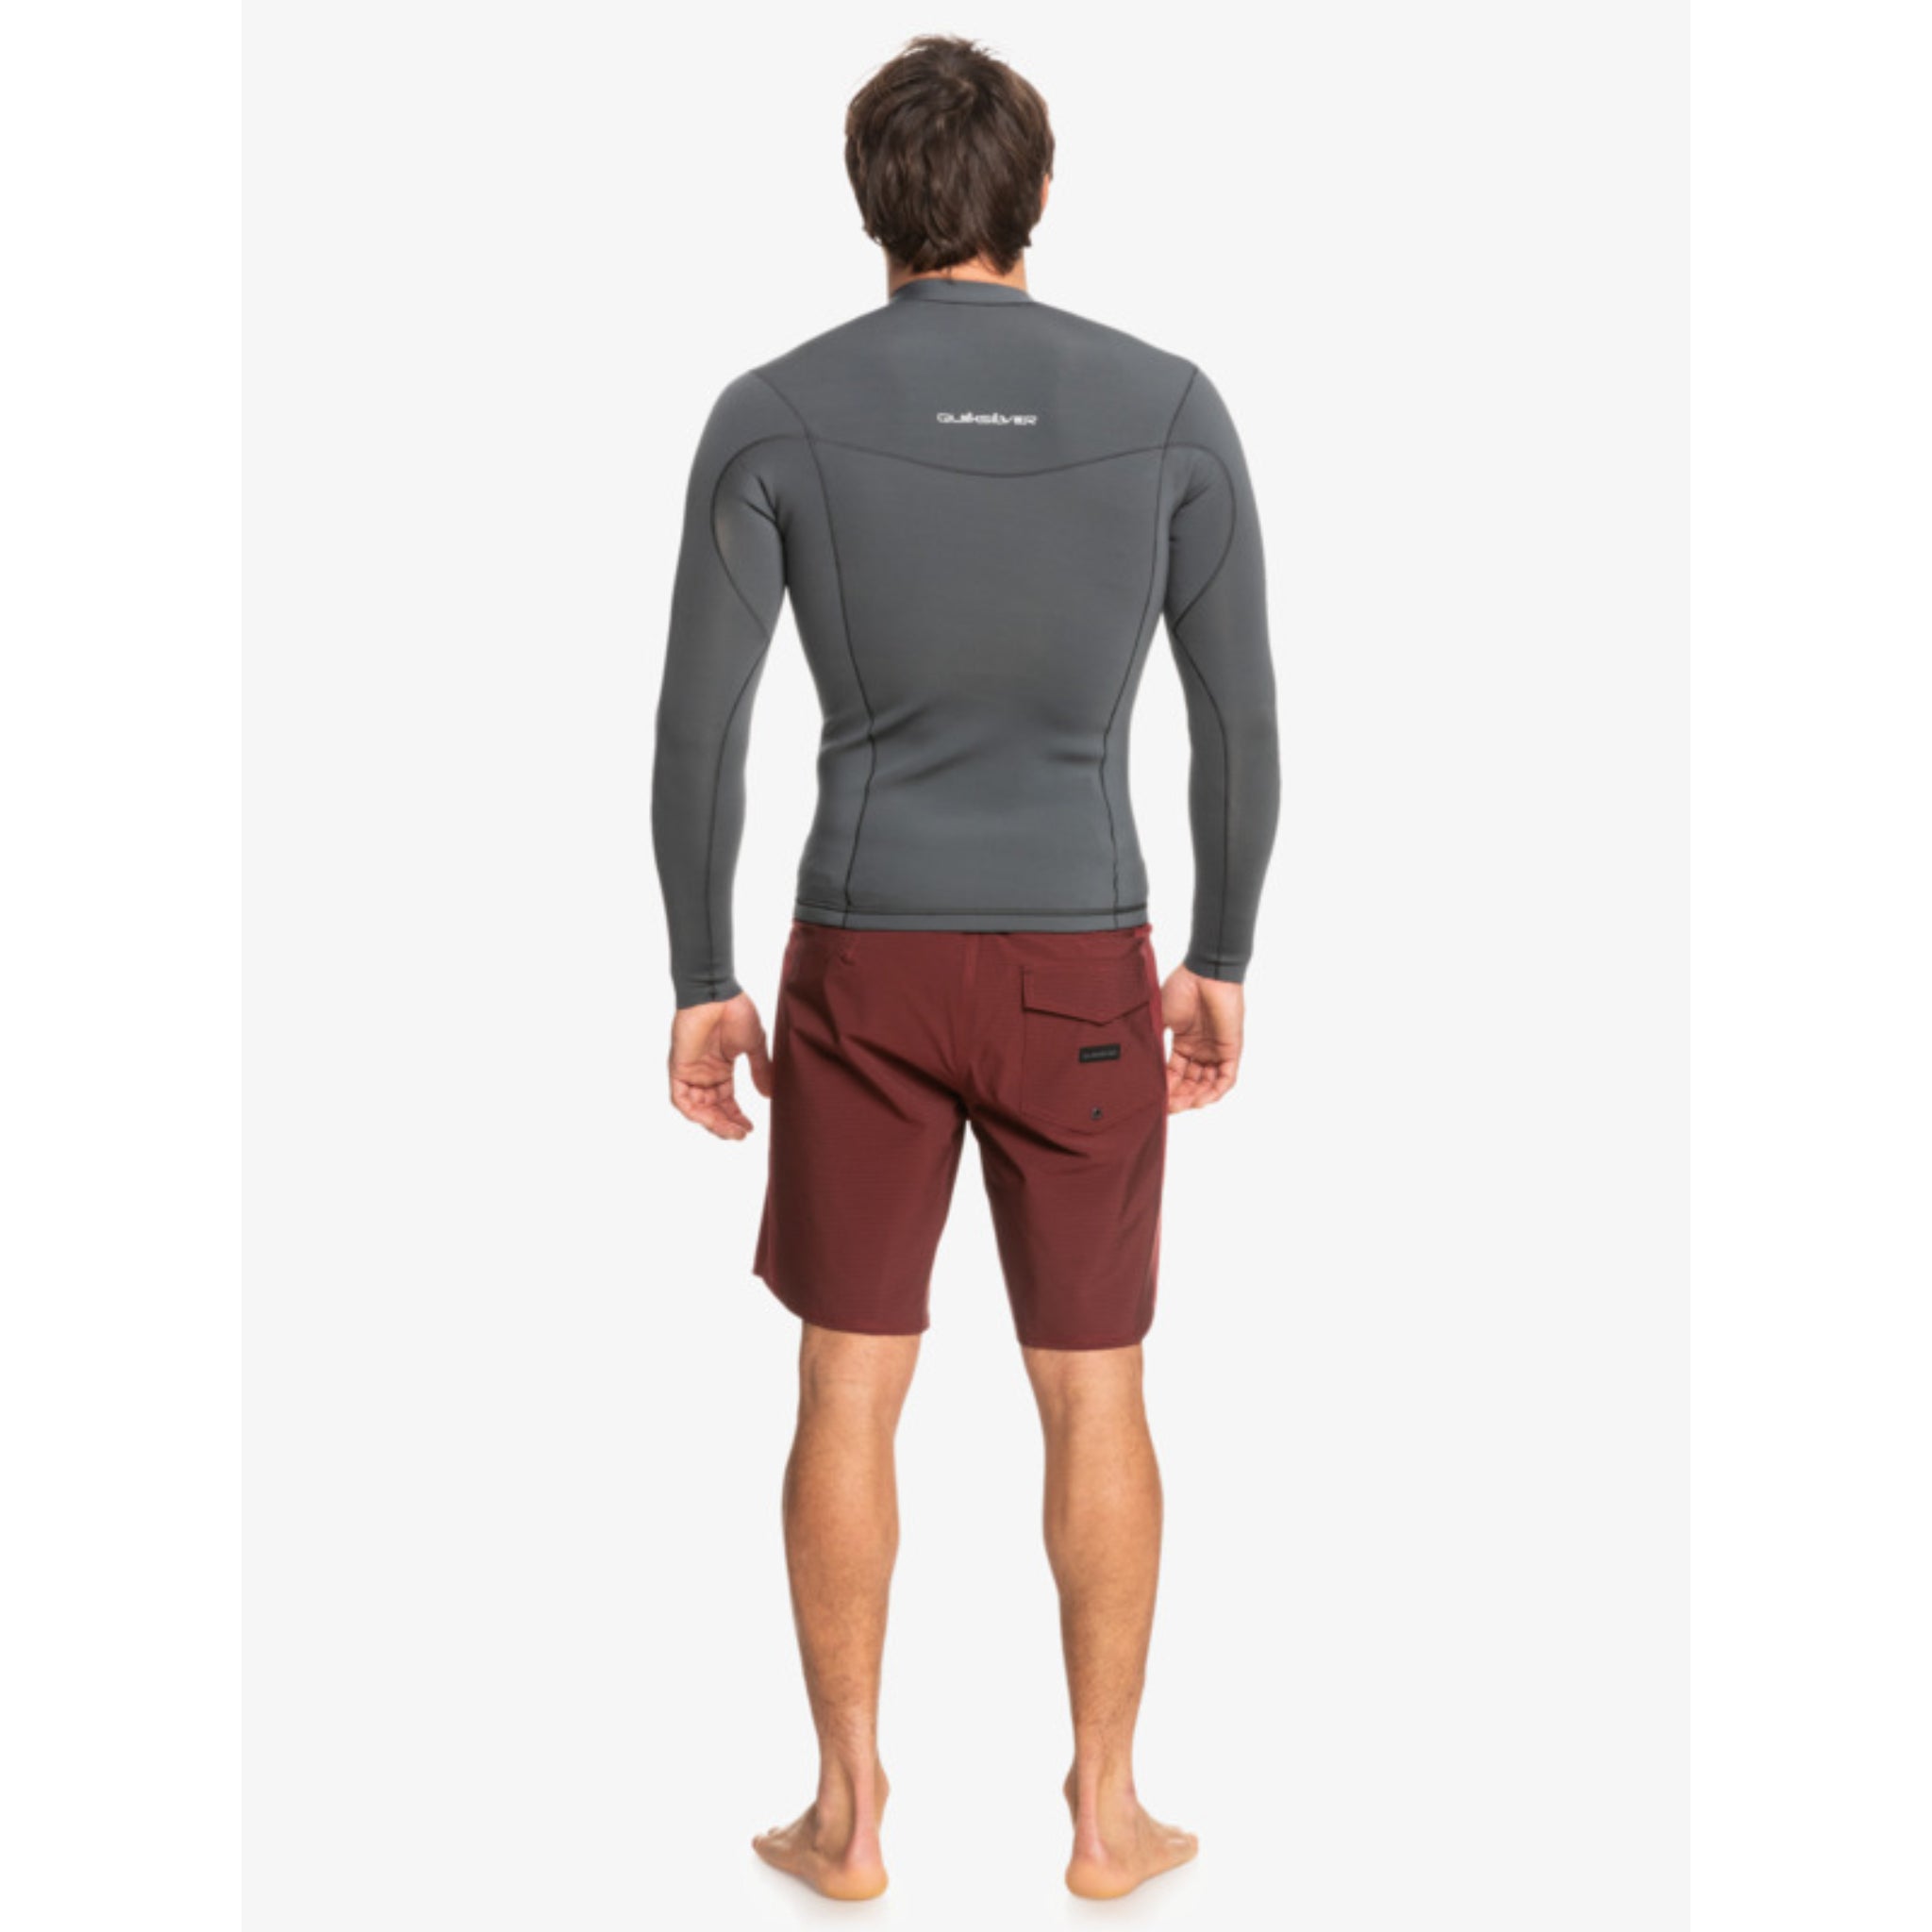 Quiksilver Everyday Sessions 1.5mm Wetsuit Jacket